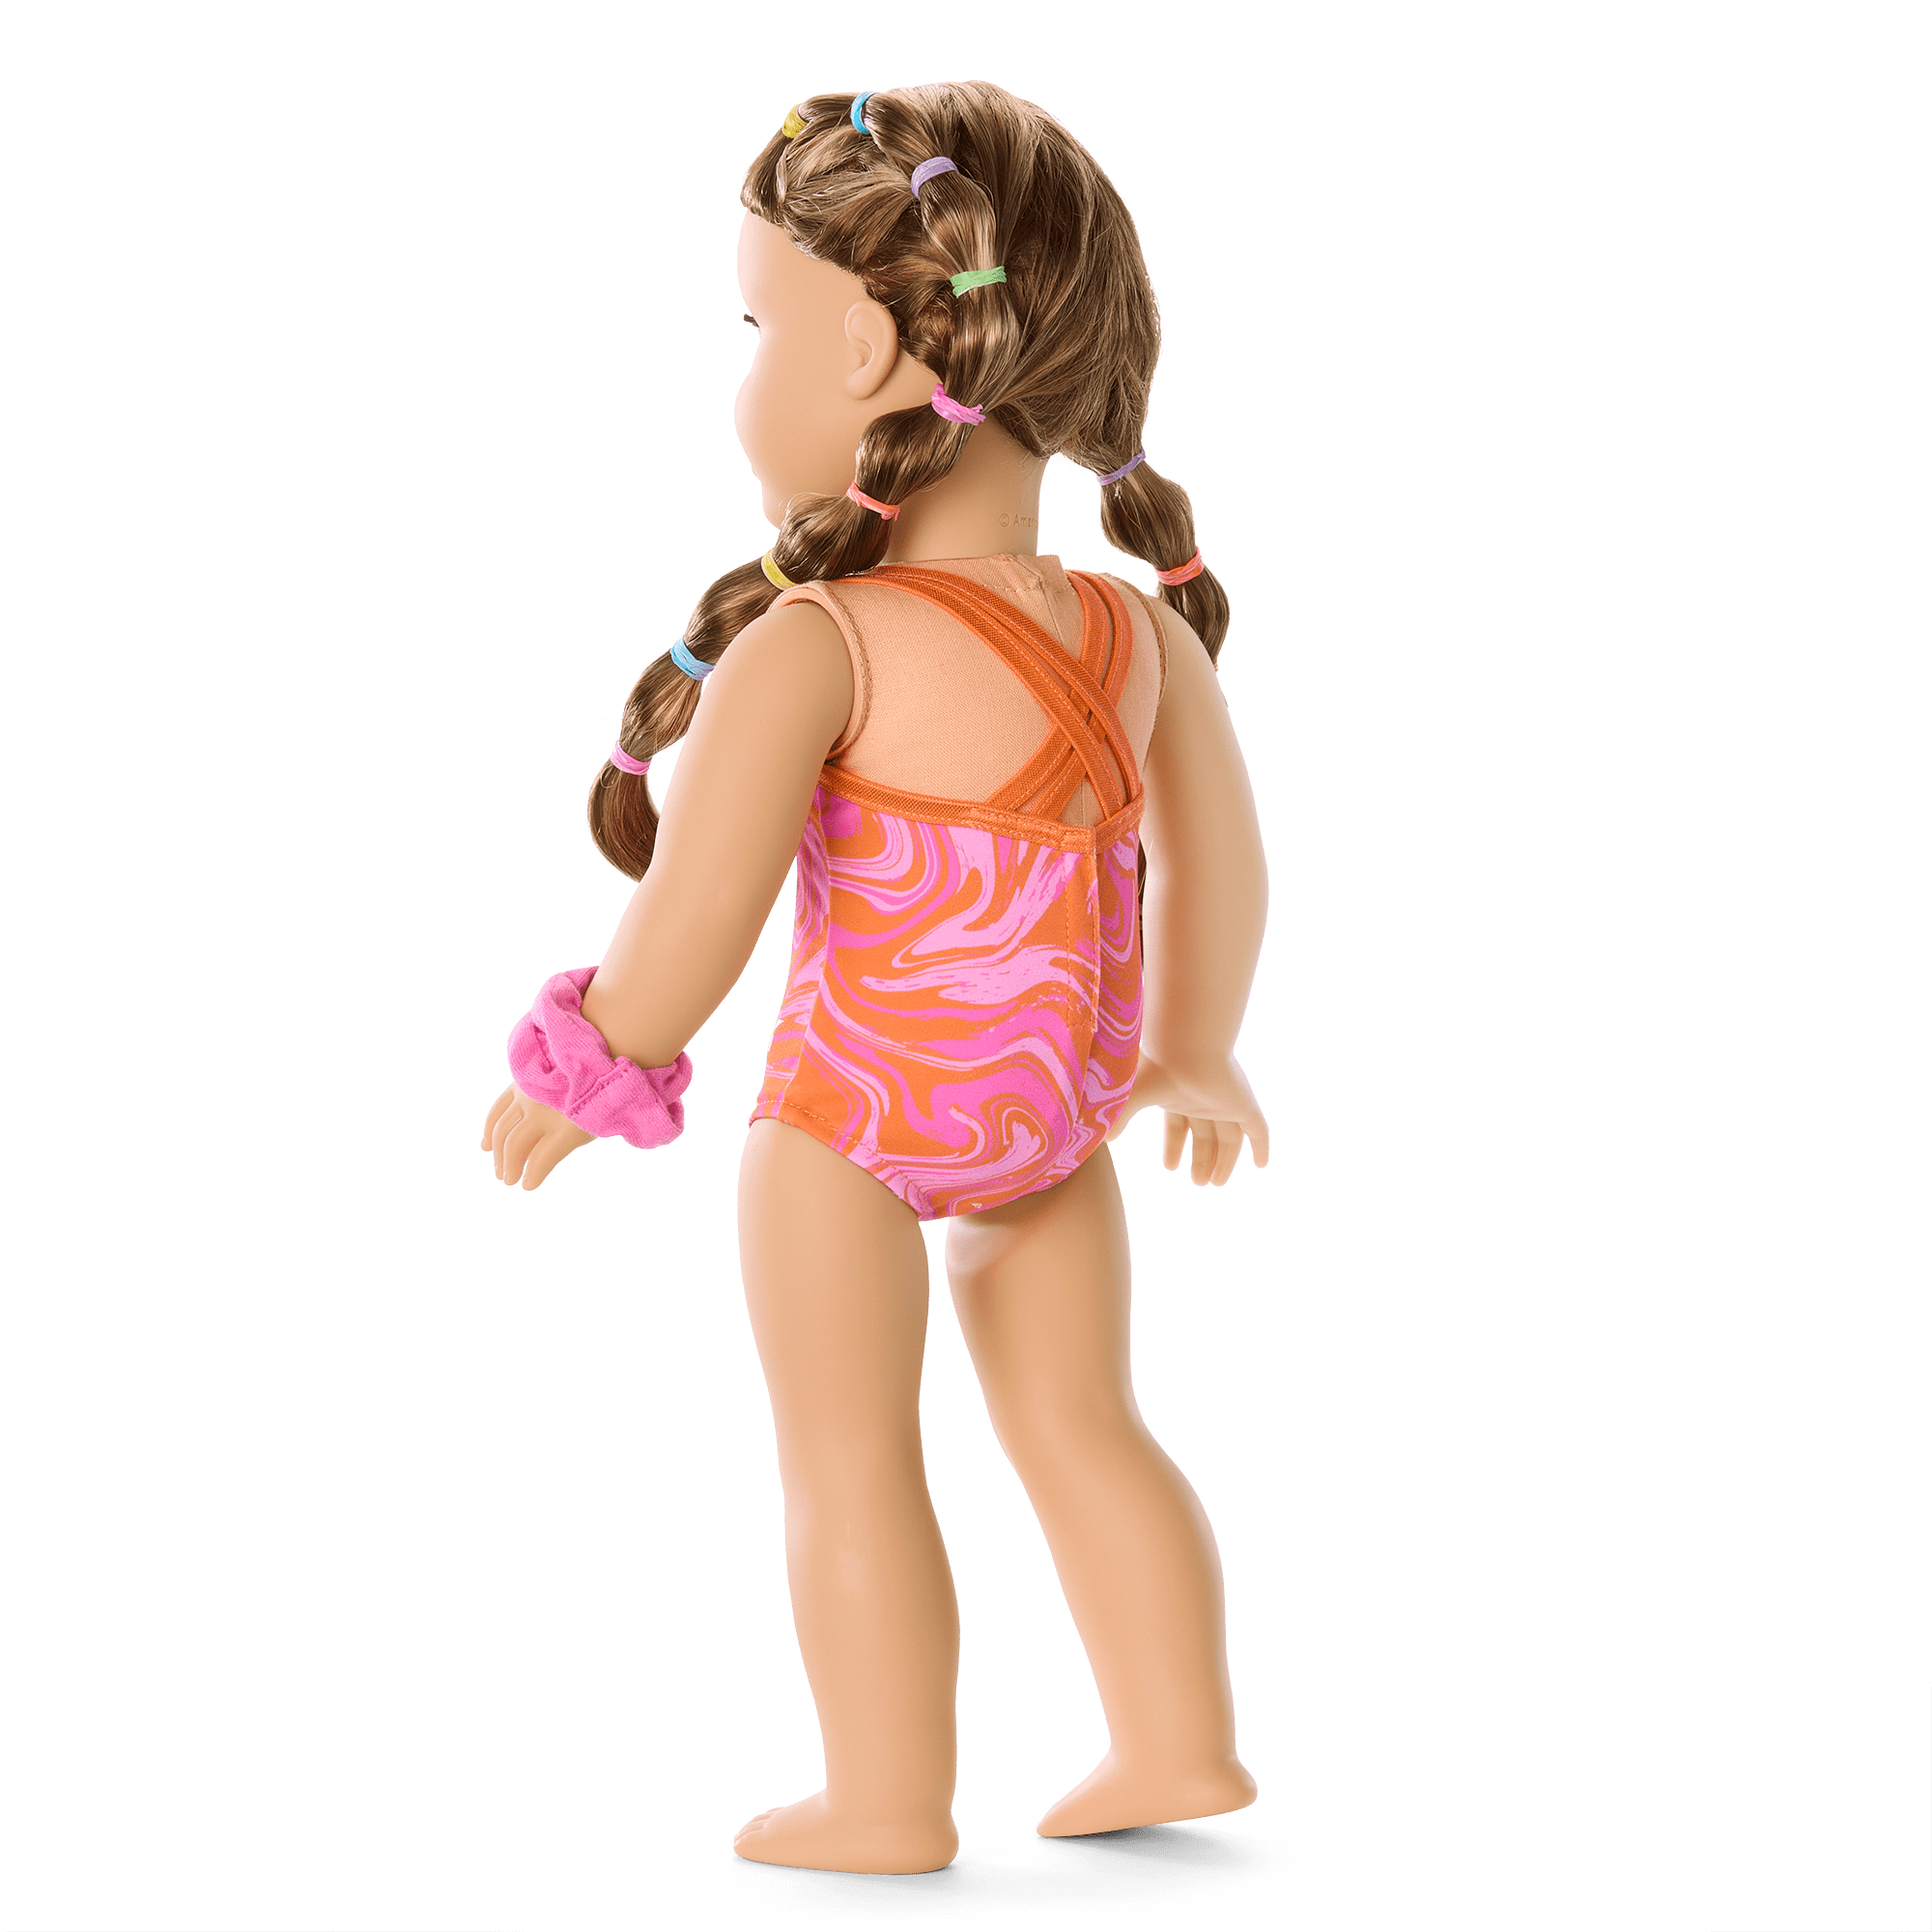 18-inch Doll Clothes - Gymnastics Leotard plus Tumbling Mat and Hair Bow -  fits American Girl ® Dolls